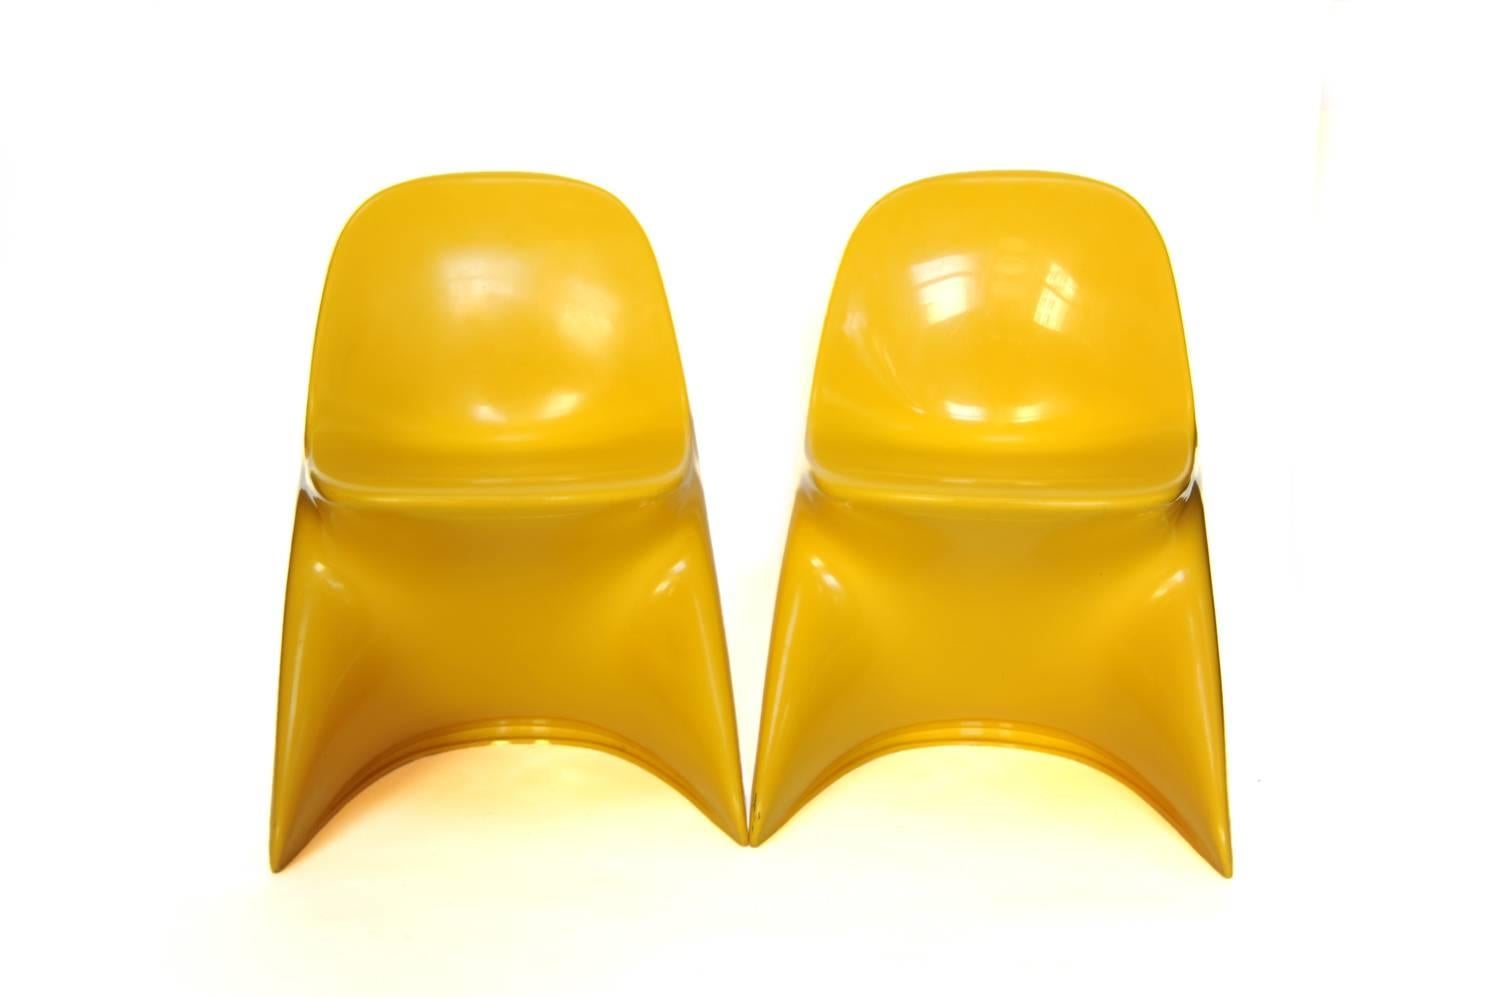 Pair of Casalino Child Chairs by Alexander Begge for Casala, Germany, 1970s

Designed by Alexander Begge and manufactured by Casala
Vintage, Germany, 1970s
Yellow Molded Plastic
H 23 in, W 14.5 in, D 15 in (seat: H 13 in)

From a private child chair